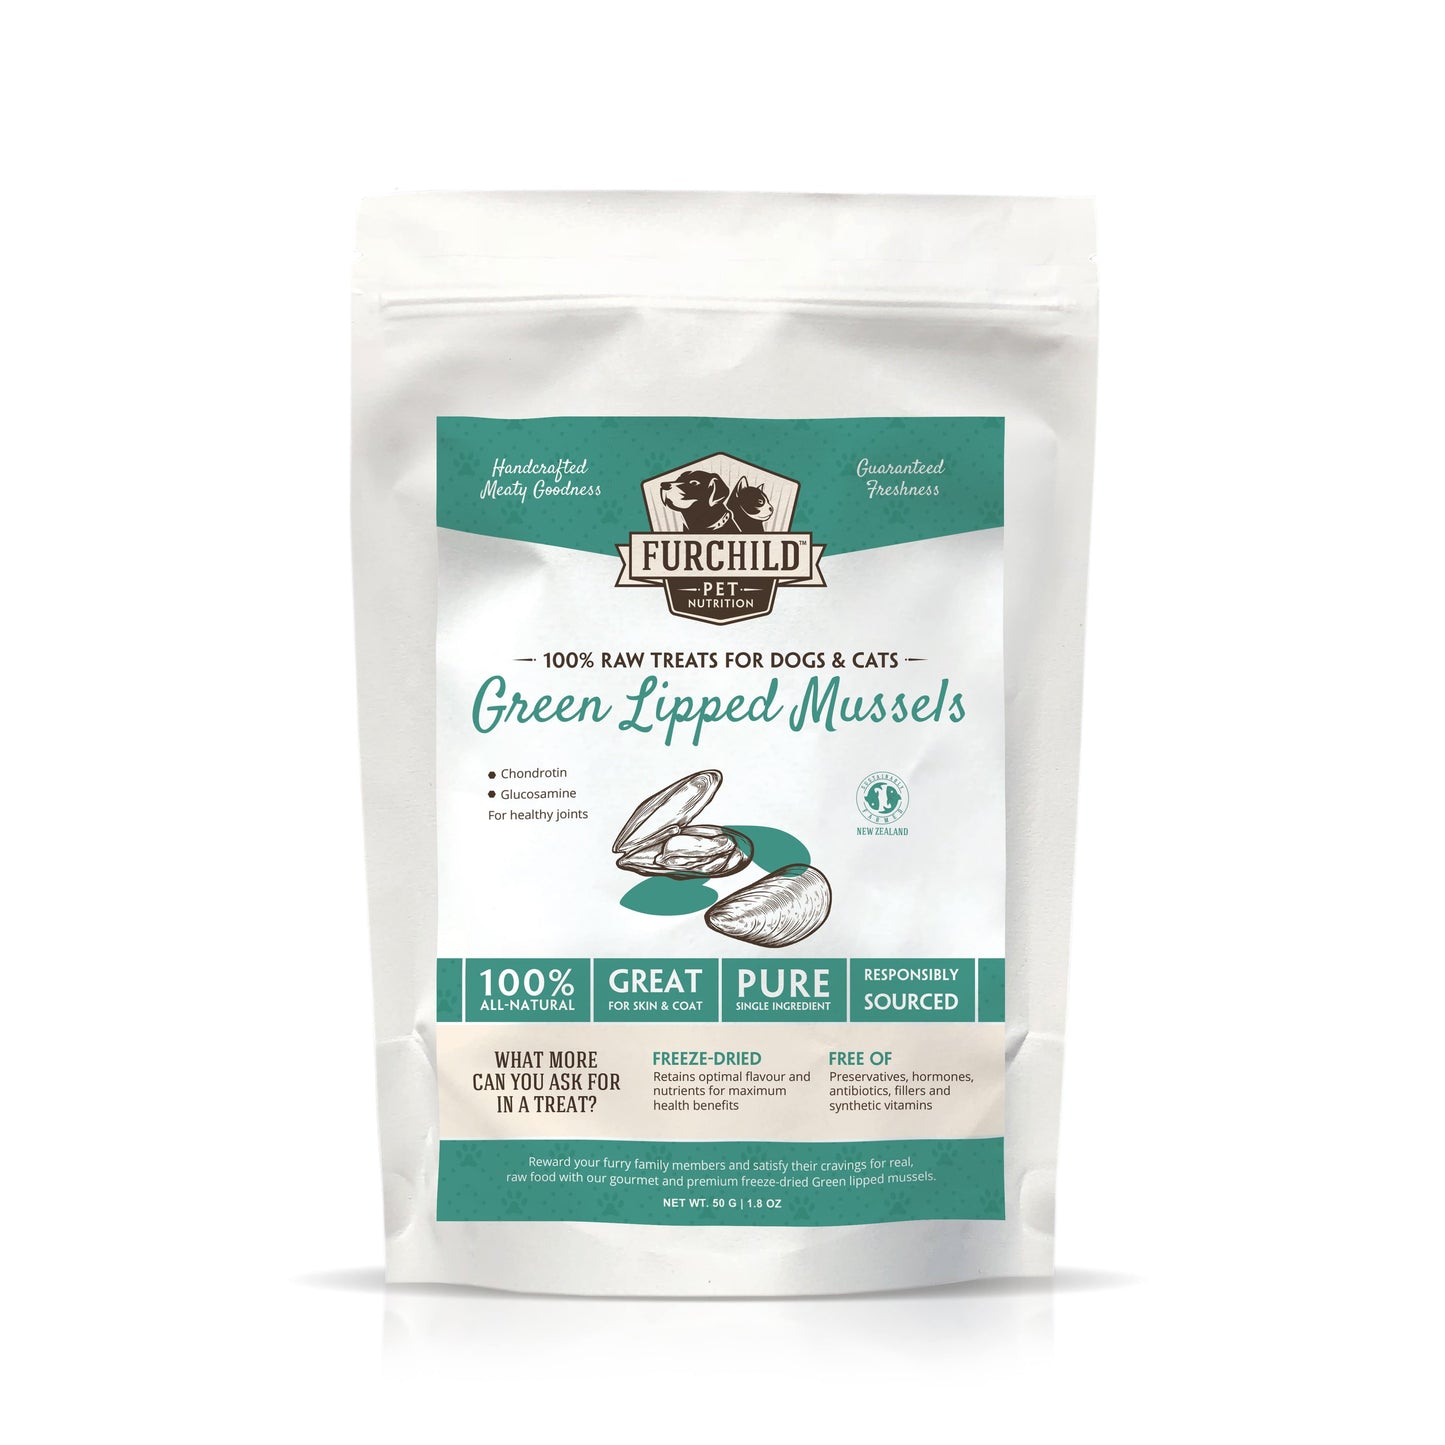 FURCHILD Premium Freeze-Dried Green Lipped Mussels - My Cat and Co.